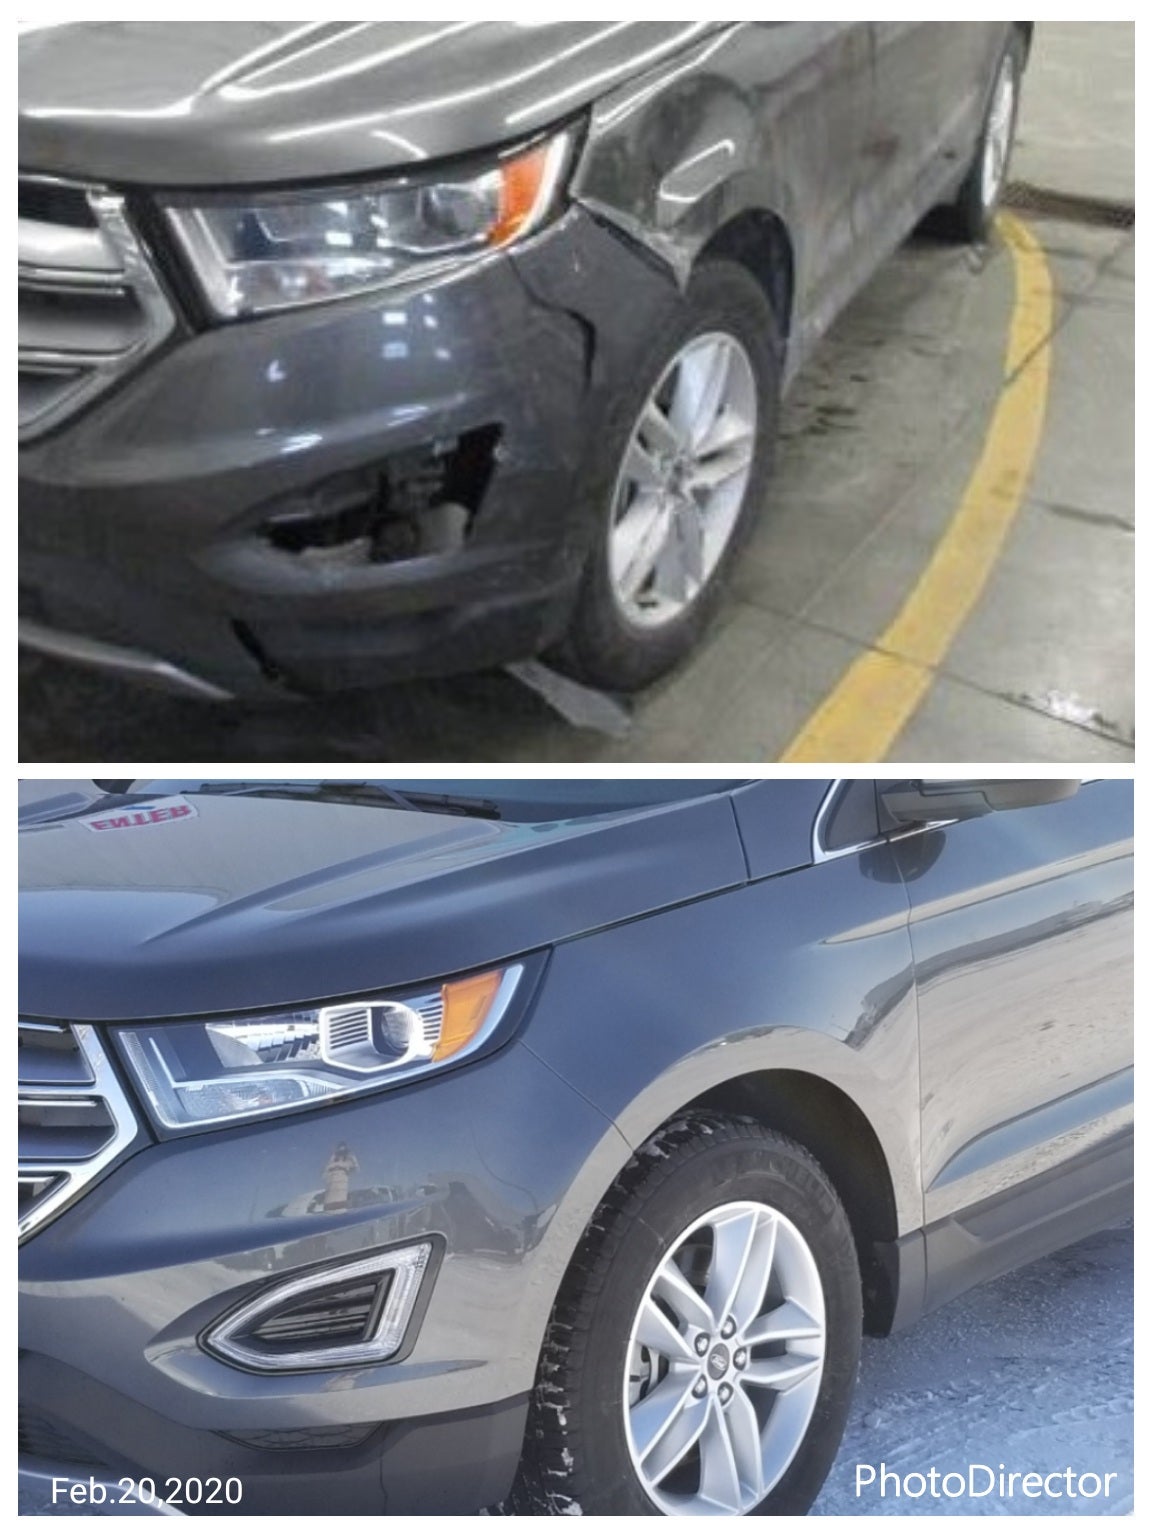 Before and After photos | Rochester Motor Cars in Rochester MN